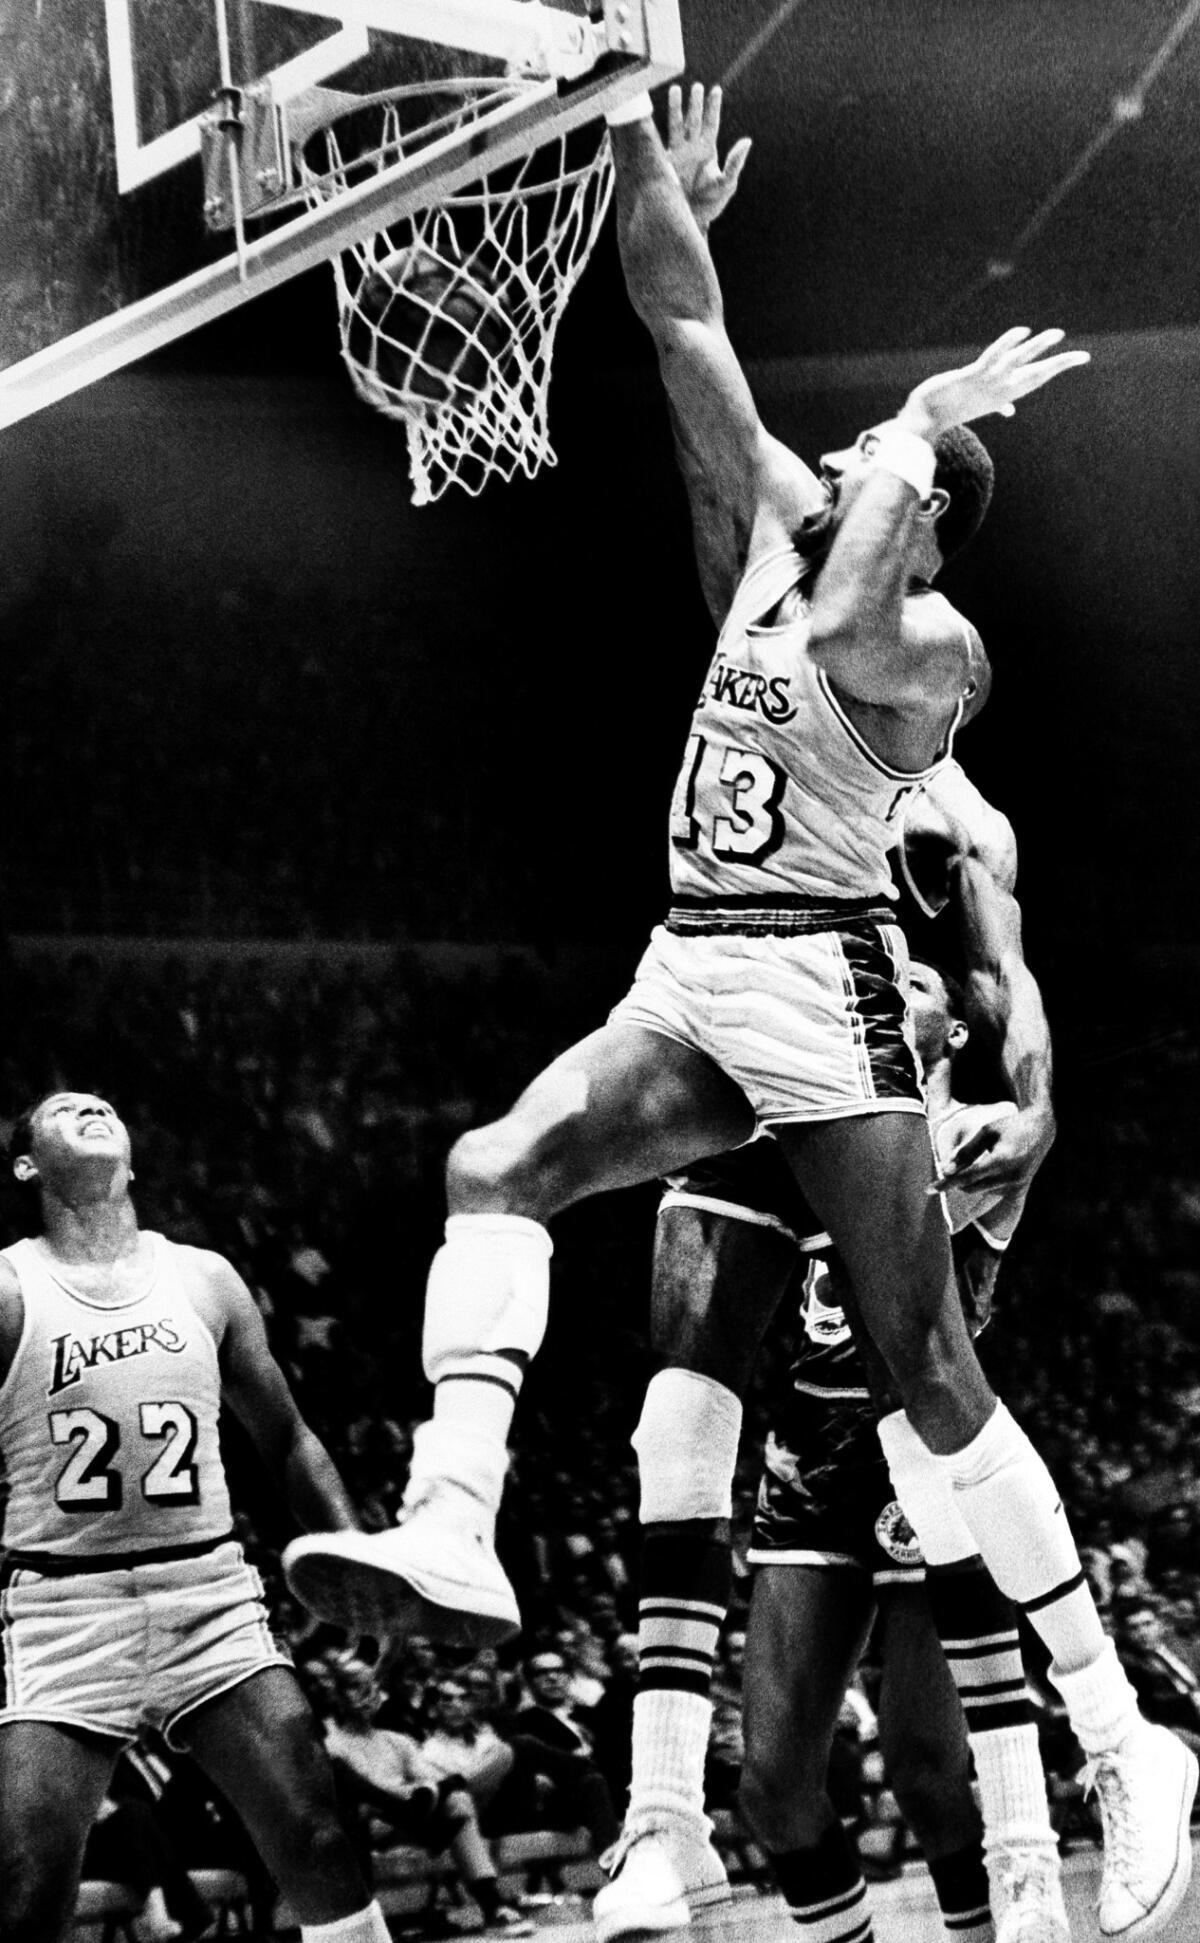 Wilt Chamberlain in his home court debut, drives in for a basket during National Basketball Association exhibition game against the San Francisco Warriors at the Forum in Inglewood, Calif., October 1, 1968.